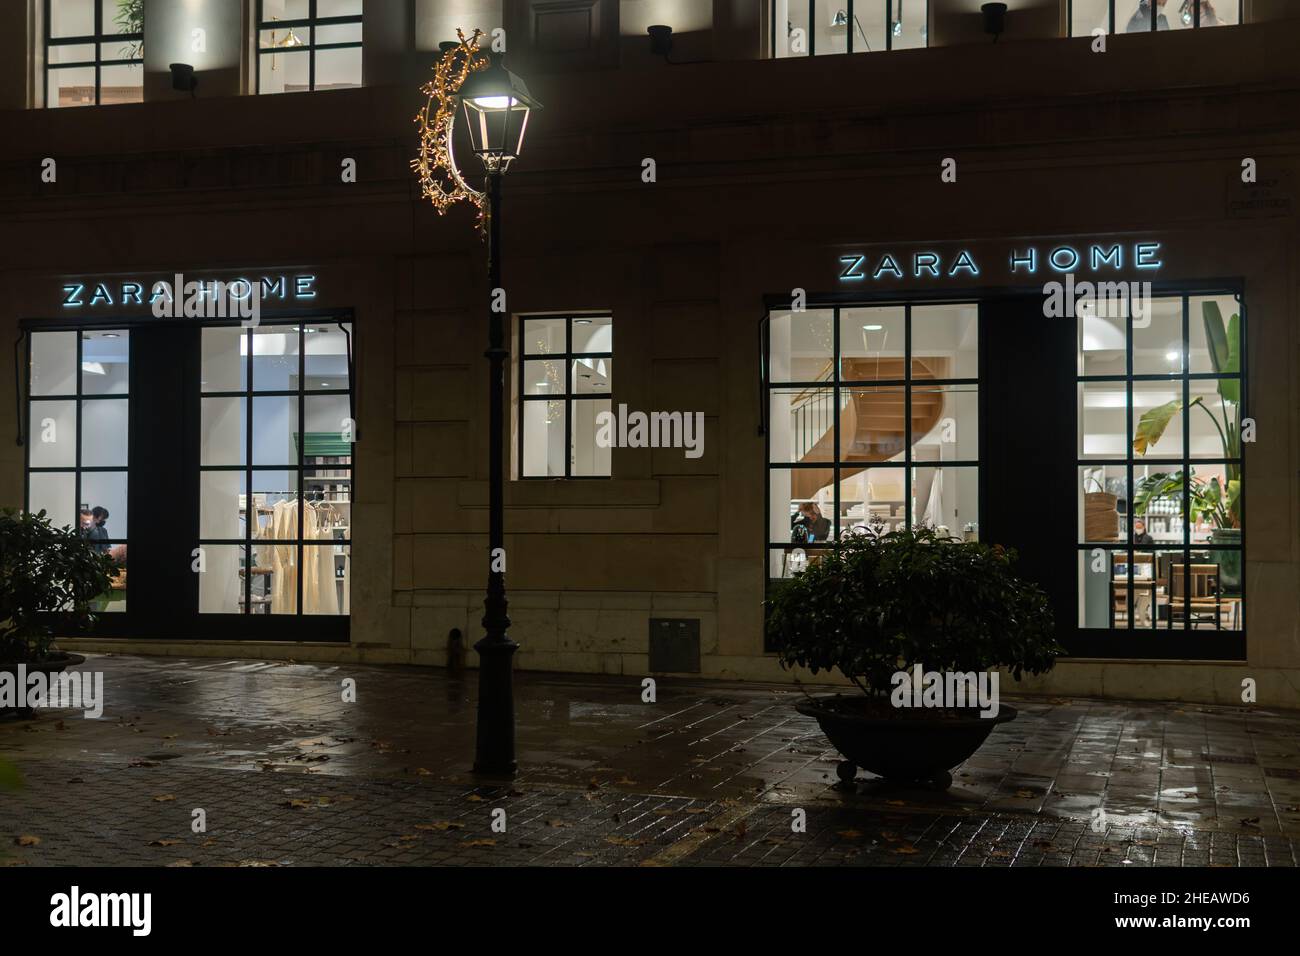 Zara Home Shop High Resolution Stock Photography and Images - Alamy